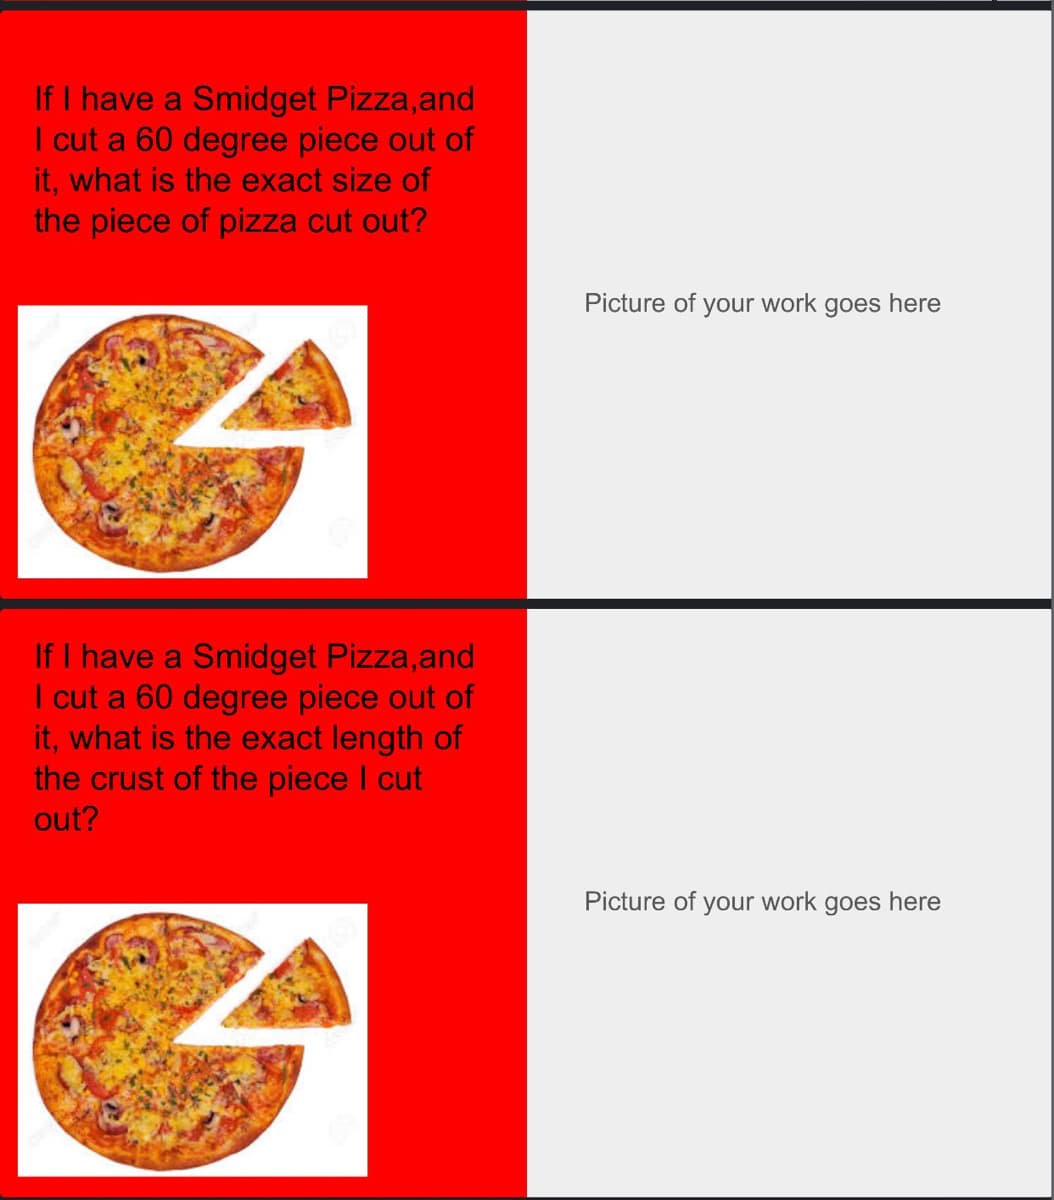 If I have a Smidget Pizza, and
I cut a 60 degree piece out of
it, what is the exact size of
the piece of pizza cut out?
If I have a Smidget Pizza, and
I cut a 60 degree piece out of
it, what is the exact length of
the crust of the piece I cut
out?
Picture of your work goes here
Picture of your work goes here